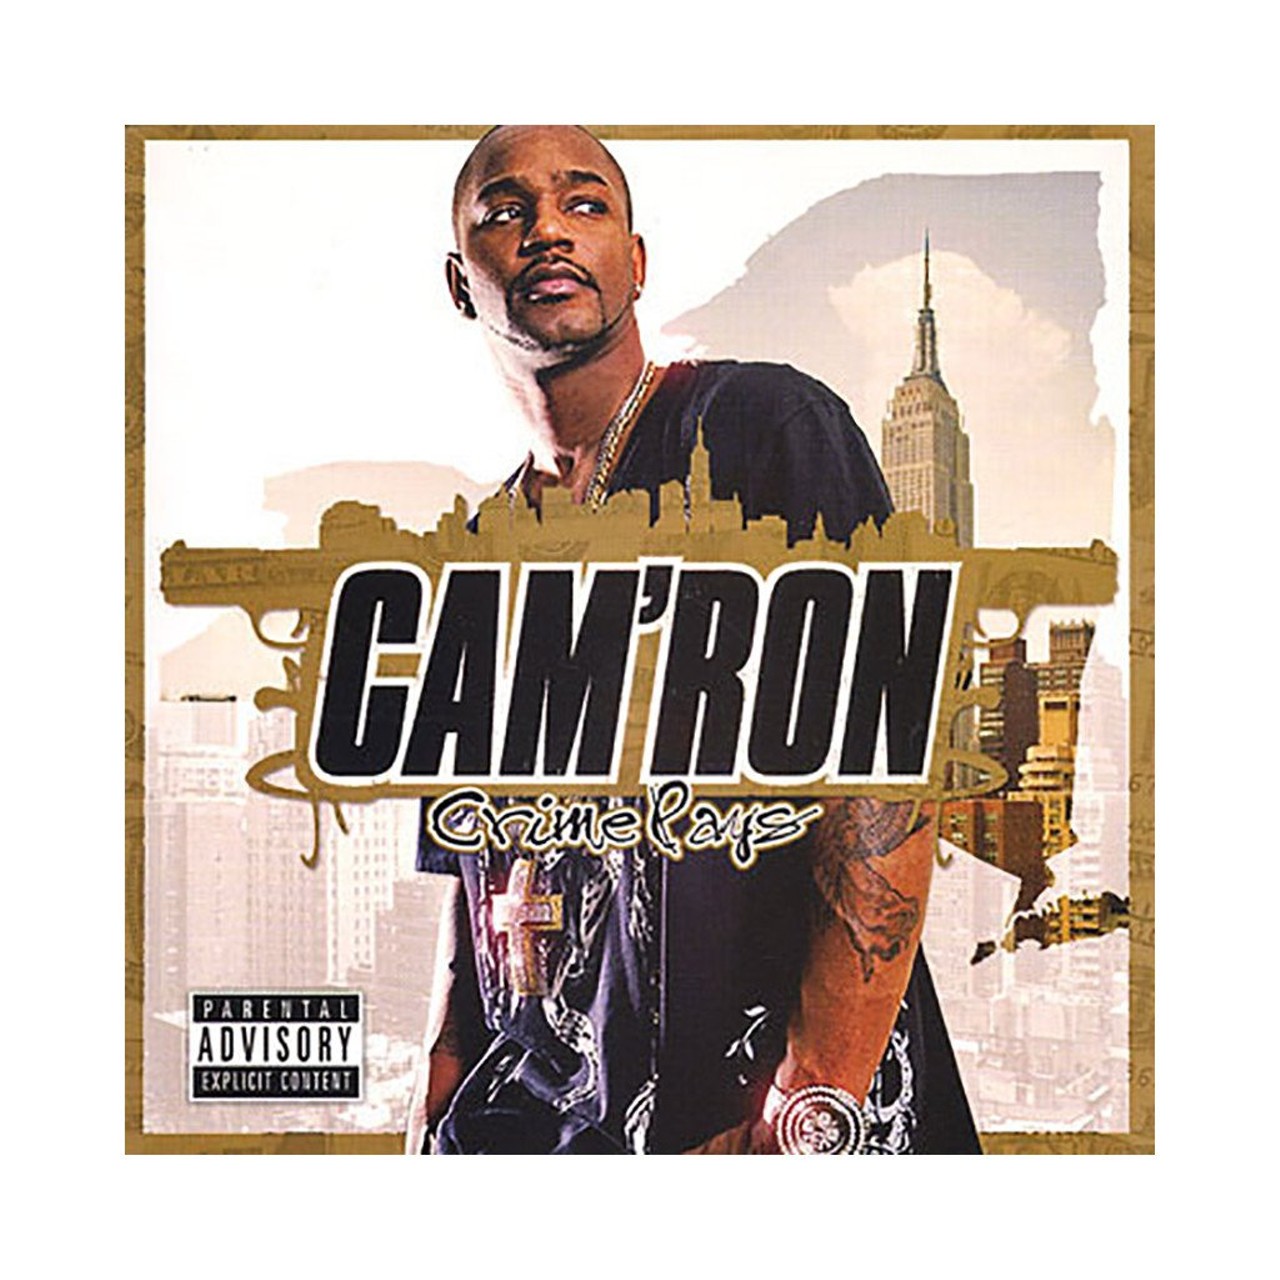  "Get it in Ohio," by Cam&#146;ron  
Ohio is unofficially the adopted home of Harlem rapper, Cam'ron (he owns a nightclub in Columbus). He's name-dropped plenty of Ohio cities throughout his discography, but "Get it in Ohio" is where he talks about the state the most. Rapping about supplying drugs to the different cities. While Cleveland isn't mentioned in this track the rapper does reference LeBron saying, "And in Akron, my n****s they would throw things/Not King James, these were coke kings."  
Crime Pays album art